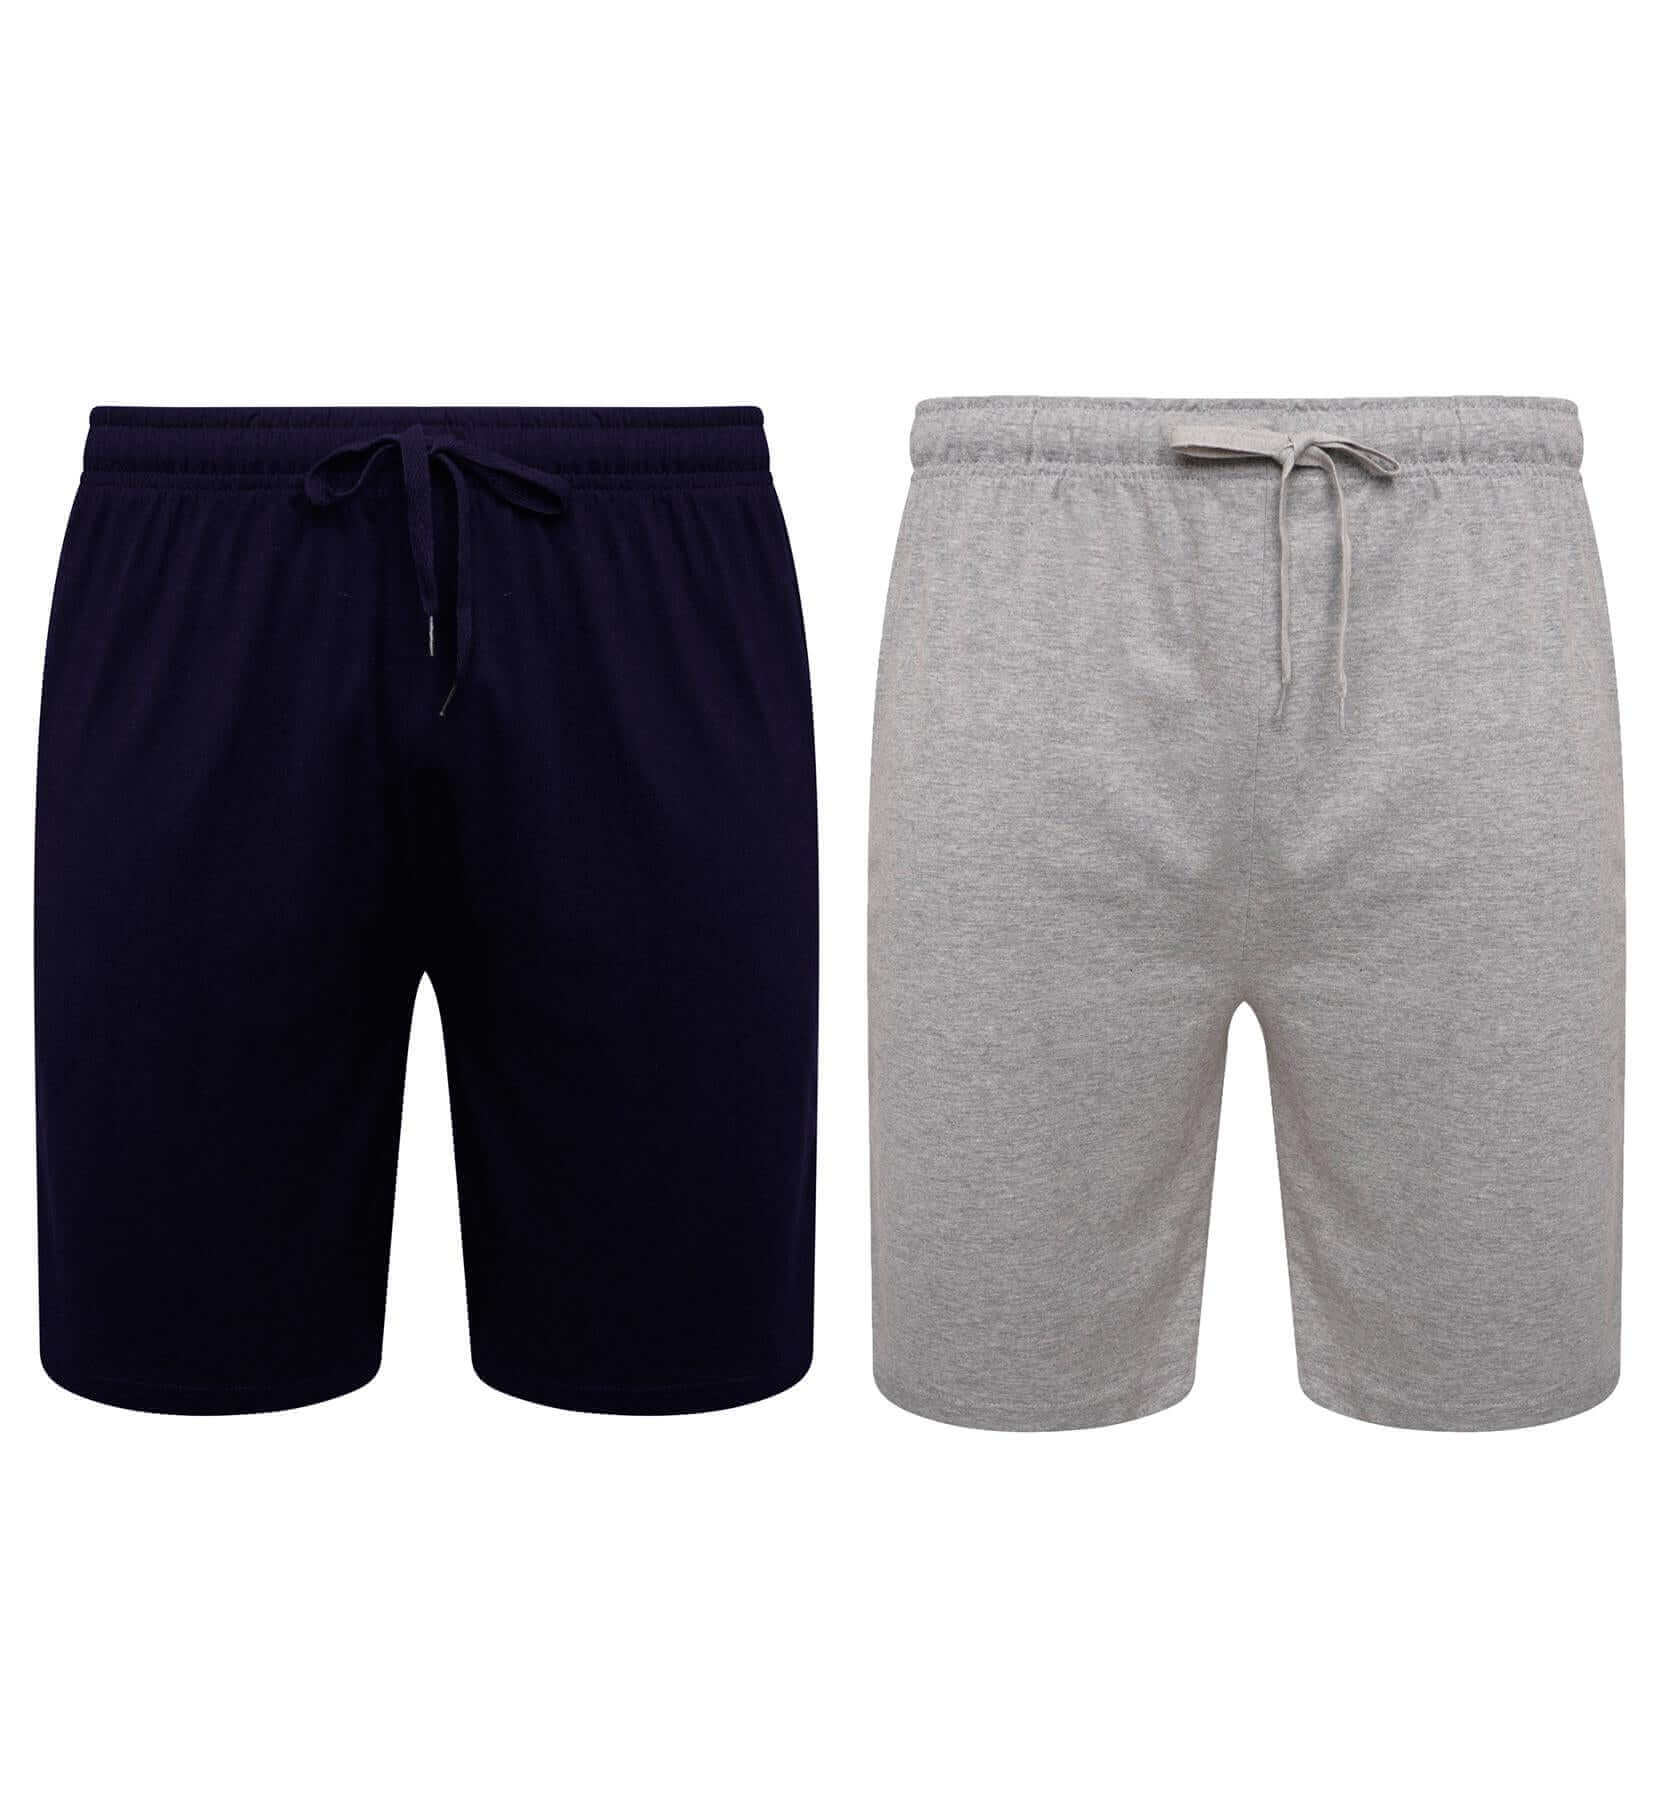 Pack of 2 Men's Shorts Pyjama Bottoms Organic Cotton Loungewear. Buy now for £10.00. A Lounge Short by Sock Stack. 3x large, 4x large, 5x large, assorted, athletics, black, bottom, boys, comfortable, cotton, grey, jersey, large, loungewear, medium, mens,